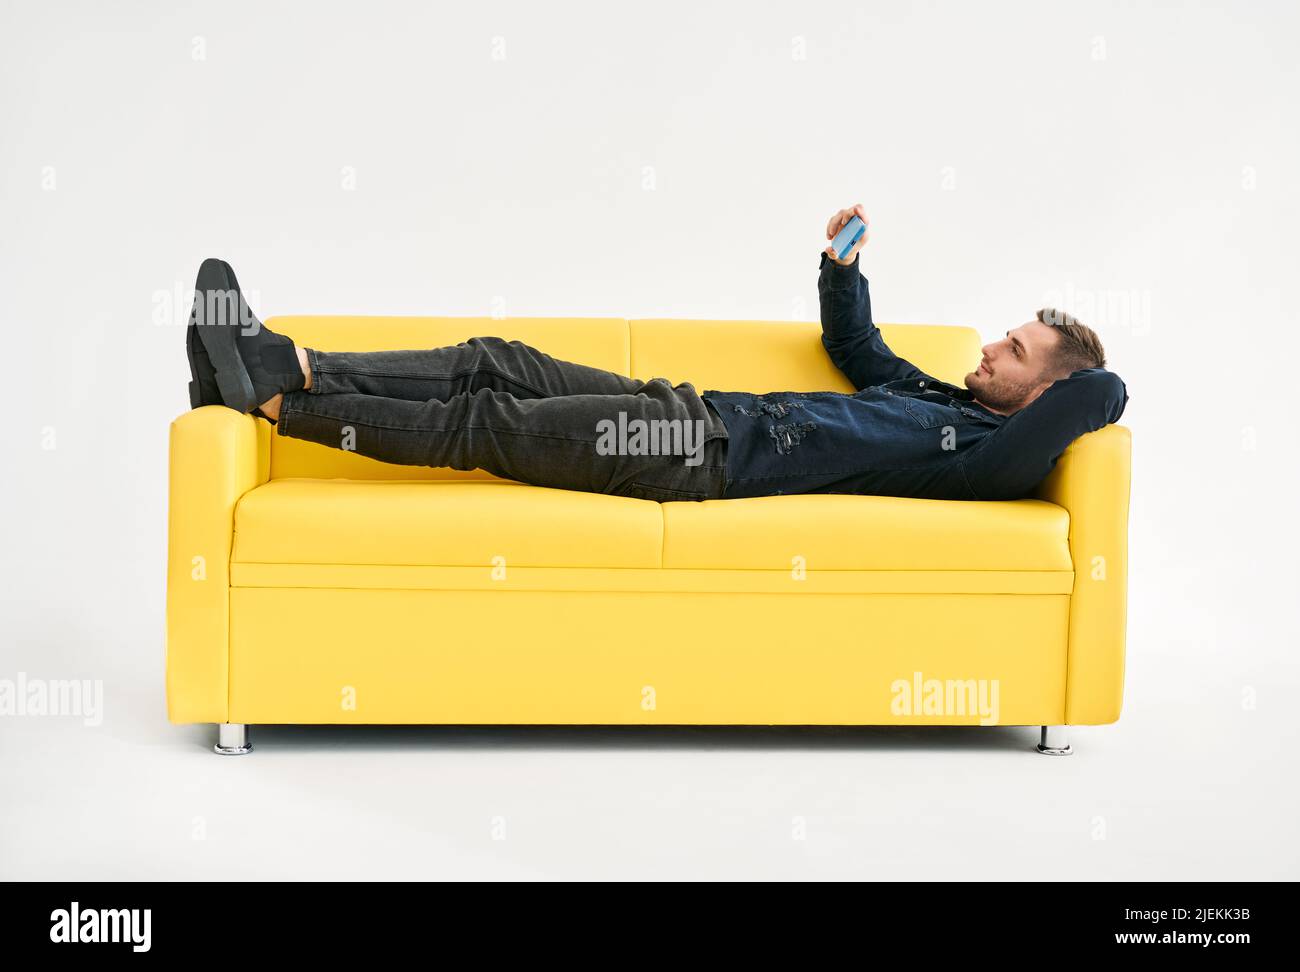 Relaxed man lying on yellow sofa talk on video call by his mobile phone over white background. Social media concept Stock Photo